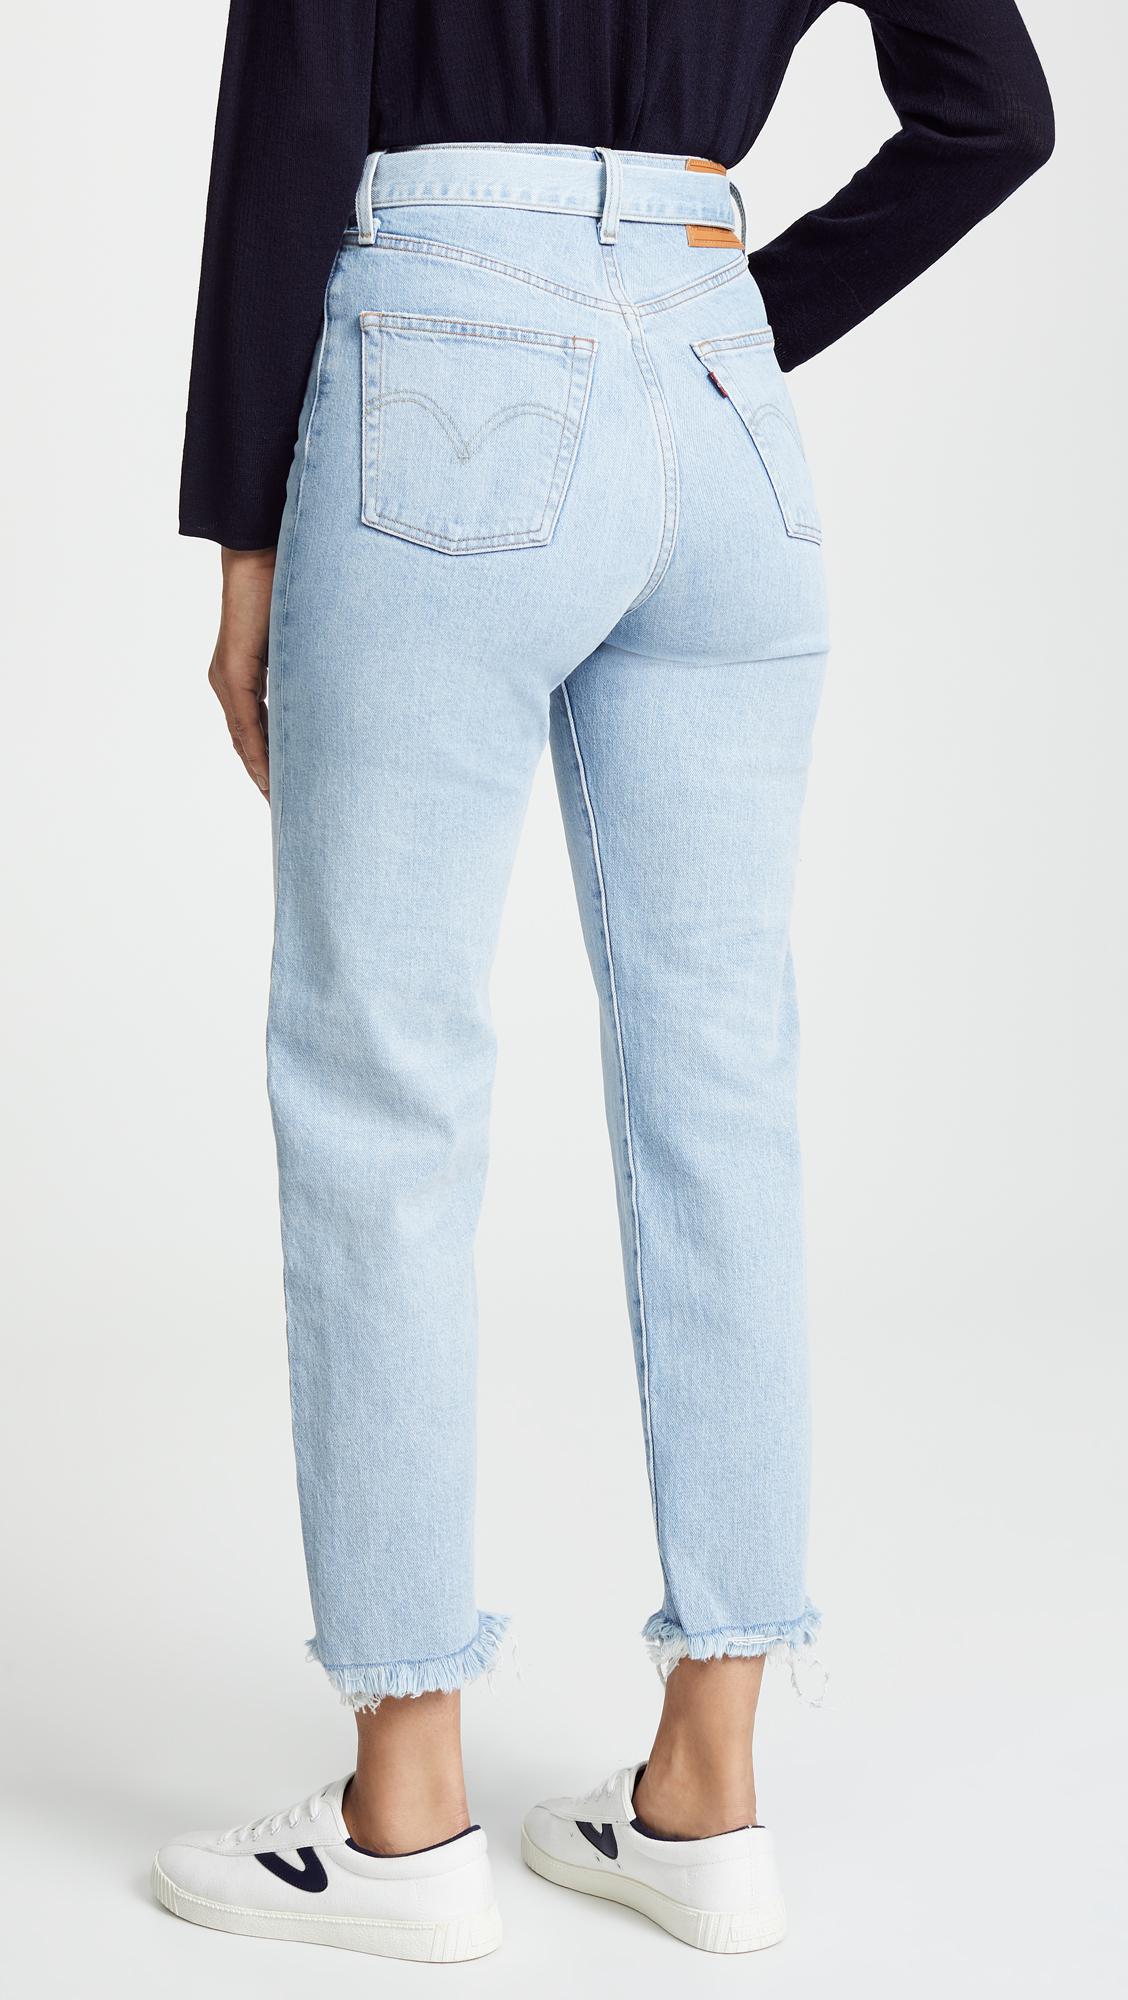 levi's ribcage jeans skinny Cheaper Than Retail Price> Buy Clothing,  Accessories and lifestyle products for women & men -